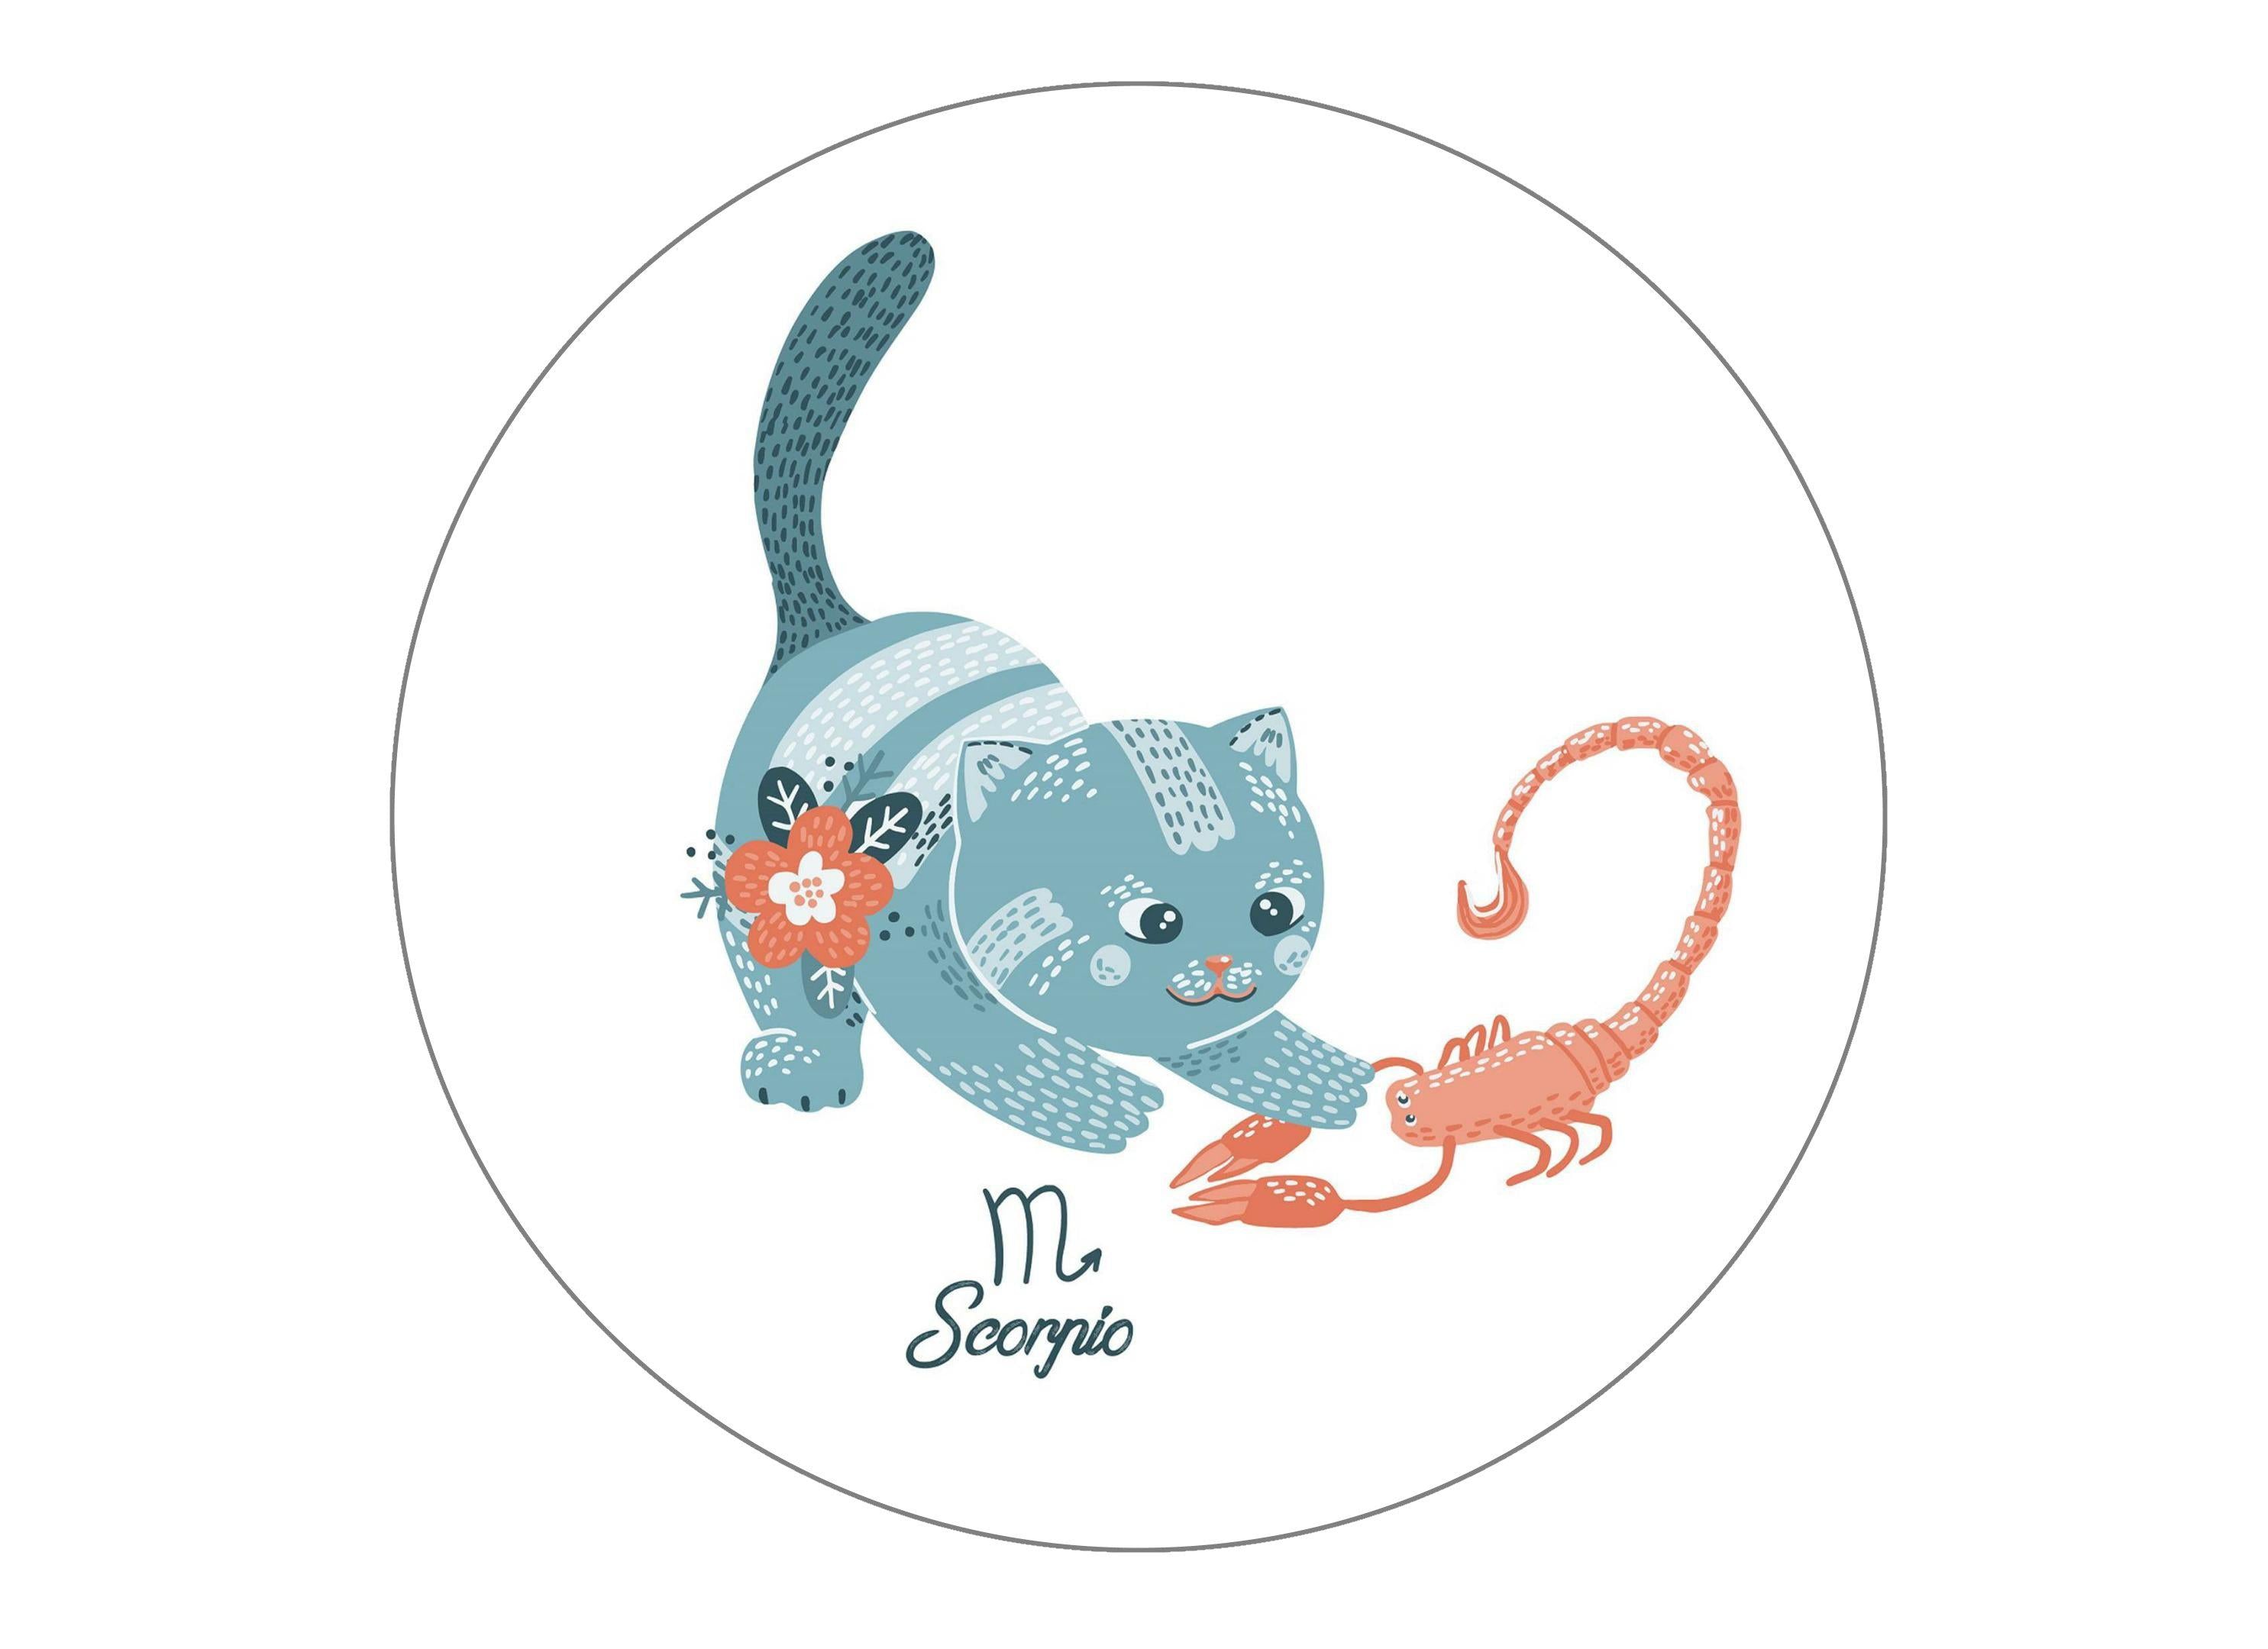 round cake topper with cute cats symbolising Scorpio the Scorpion Star Sign